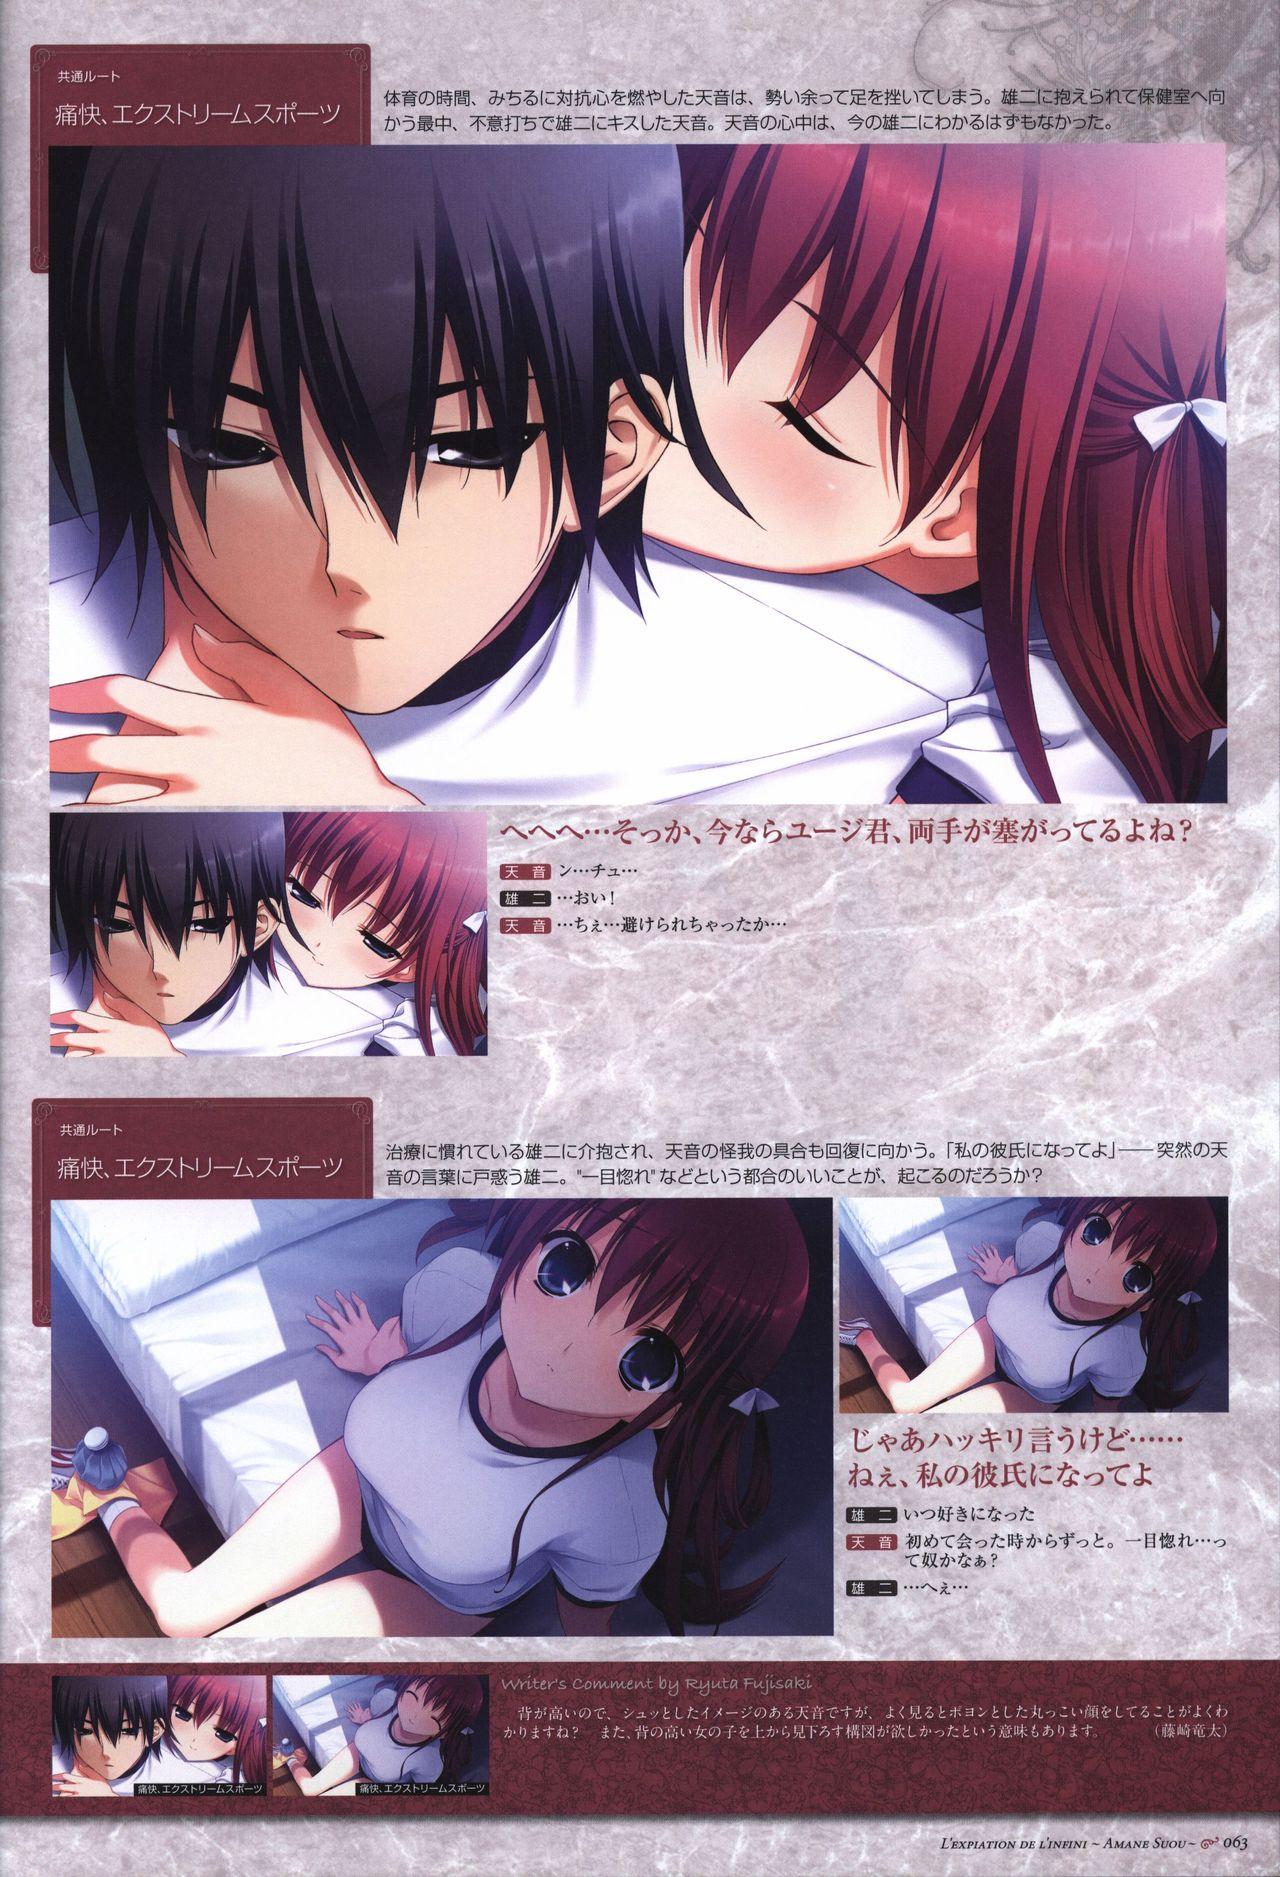 The Fruit of Grisaia Visual FanBook 63